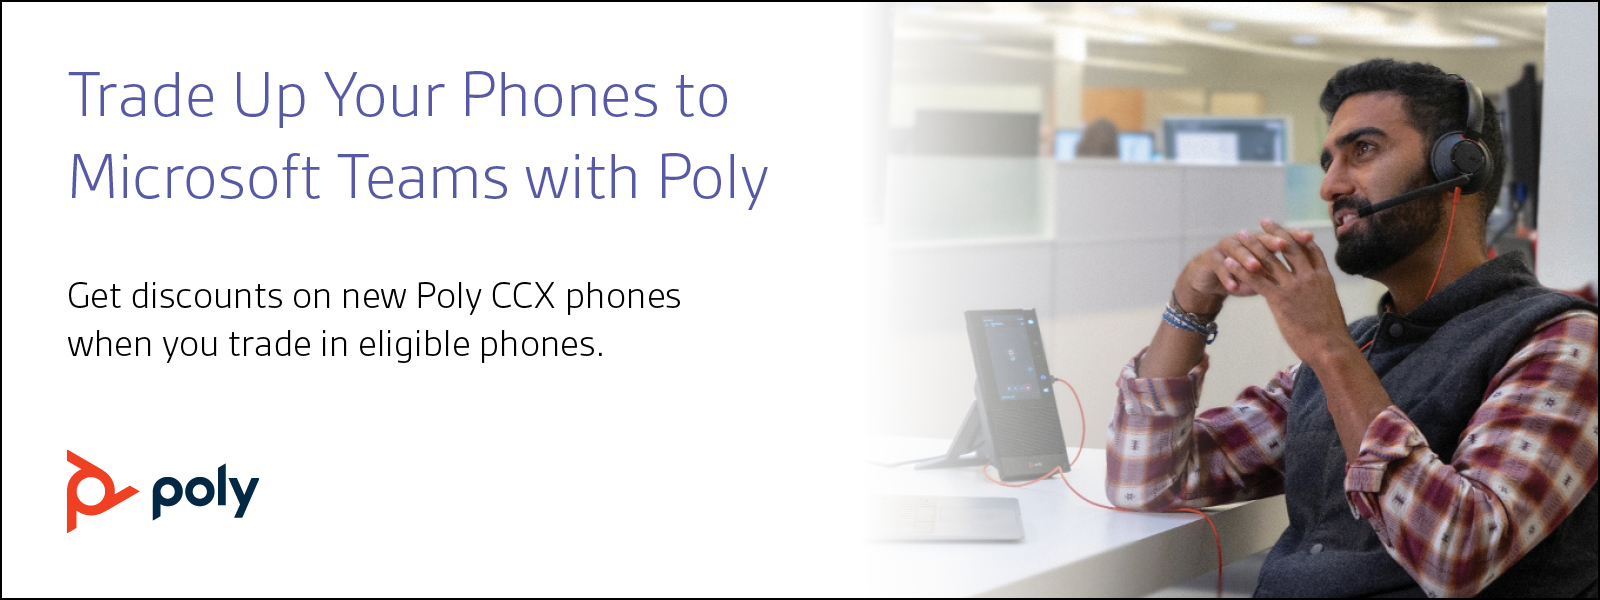 TRADE UP YOUR PHONES TO MICROSOFT TEAMS WITH POLY